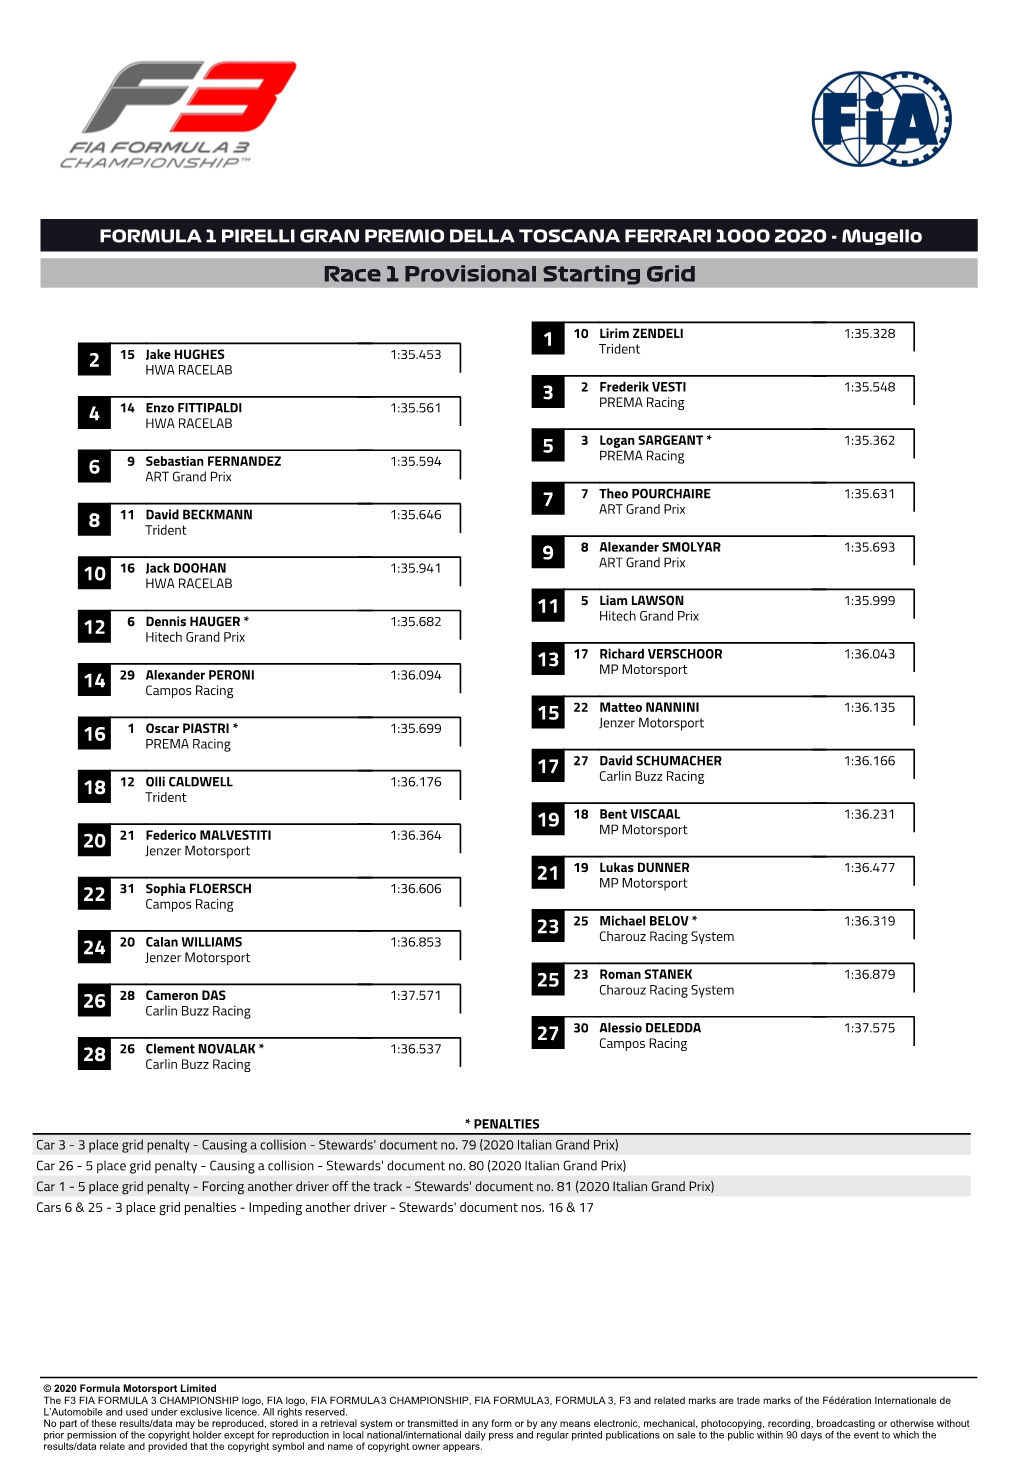 3 5 7 9 6 Race 1 Provisional Starting Grid